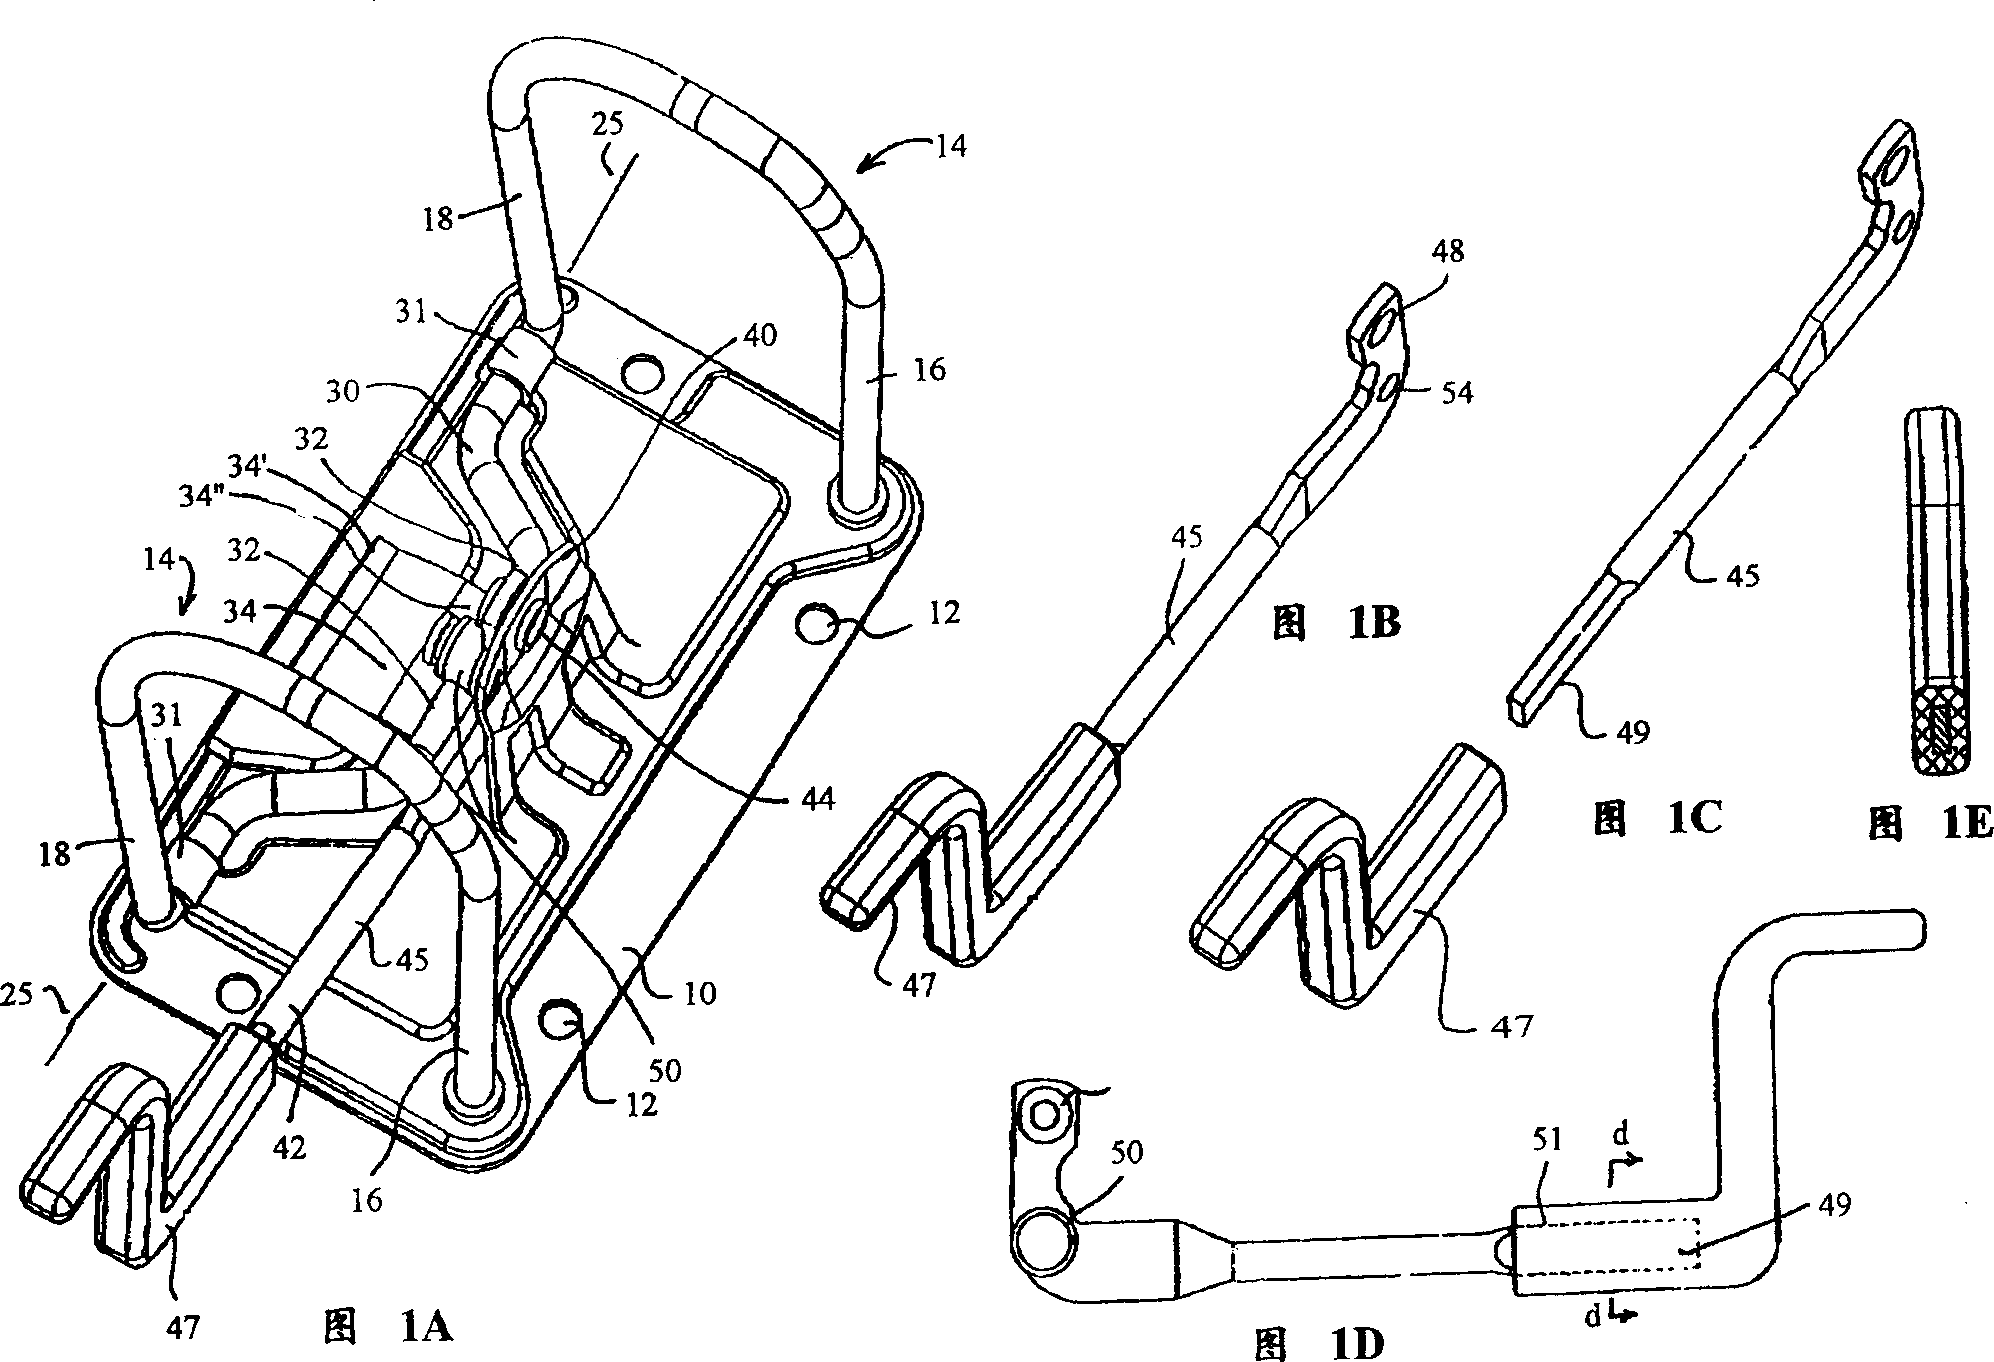 Mechanism for holding paper pad in folder